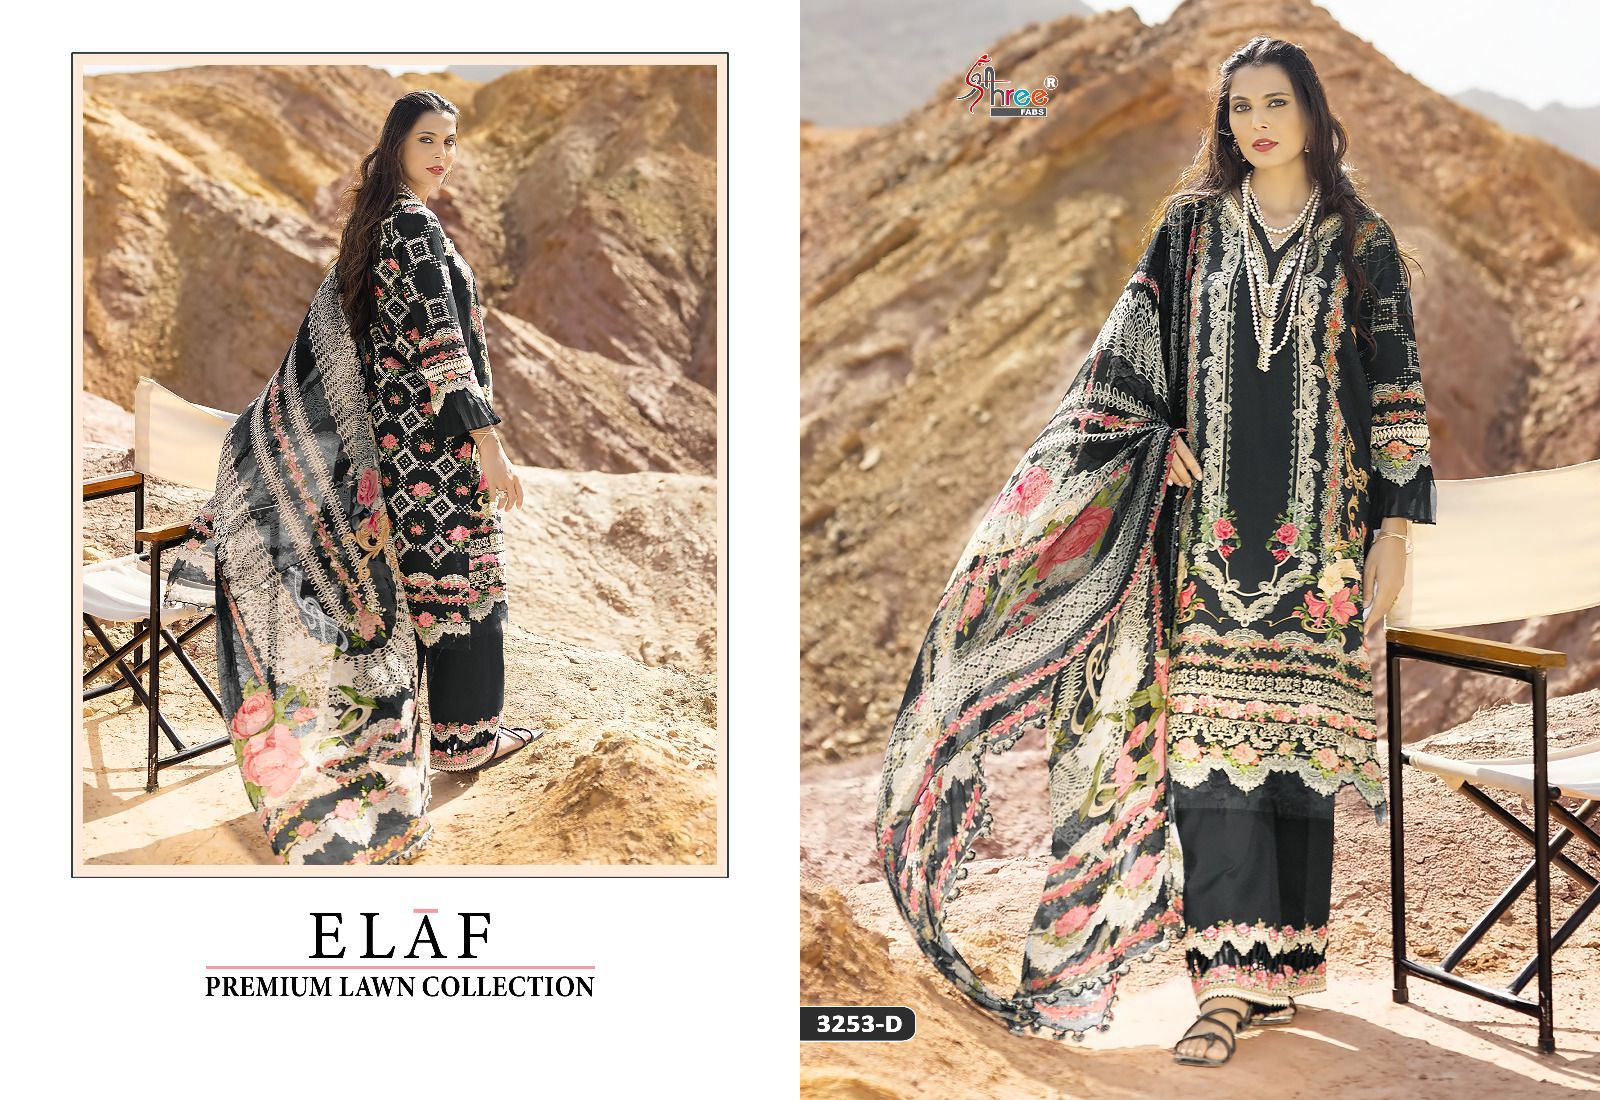 Shree Elaf Premium Lawn Collection collection 1